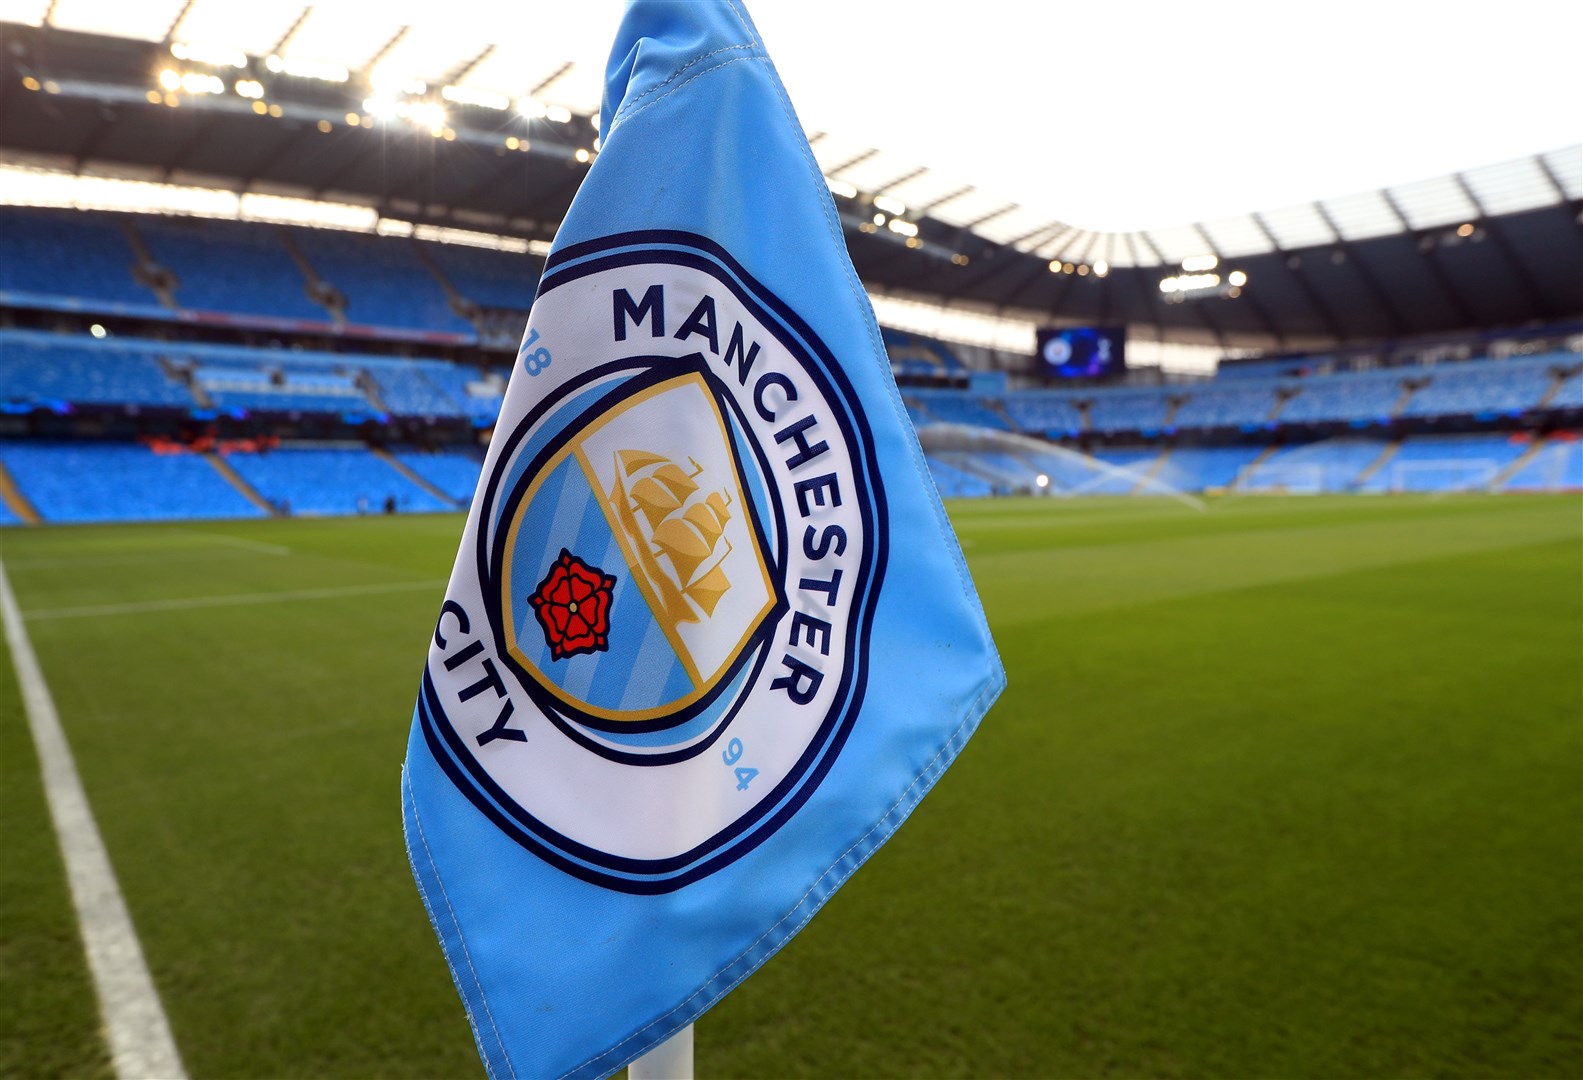 Eight men have made damages claims against Manchester City football club (Mike Egerton/PA)